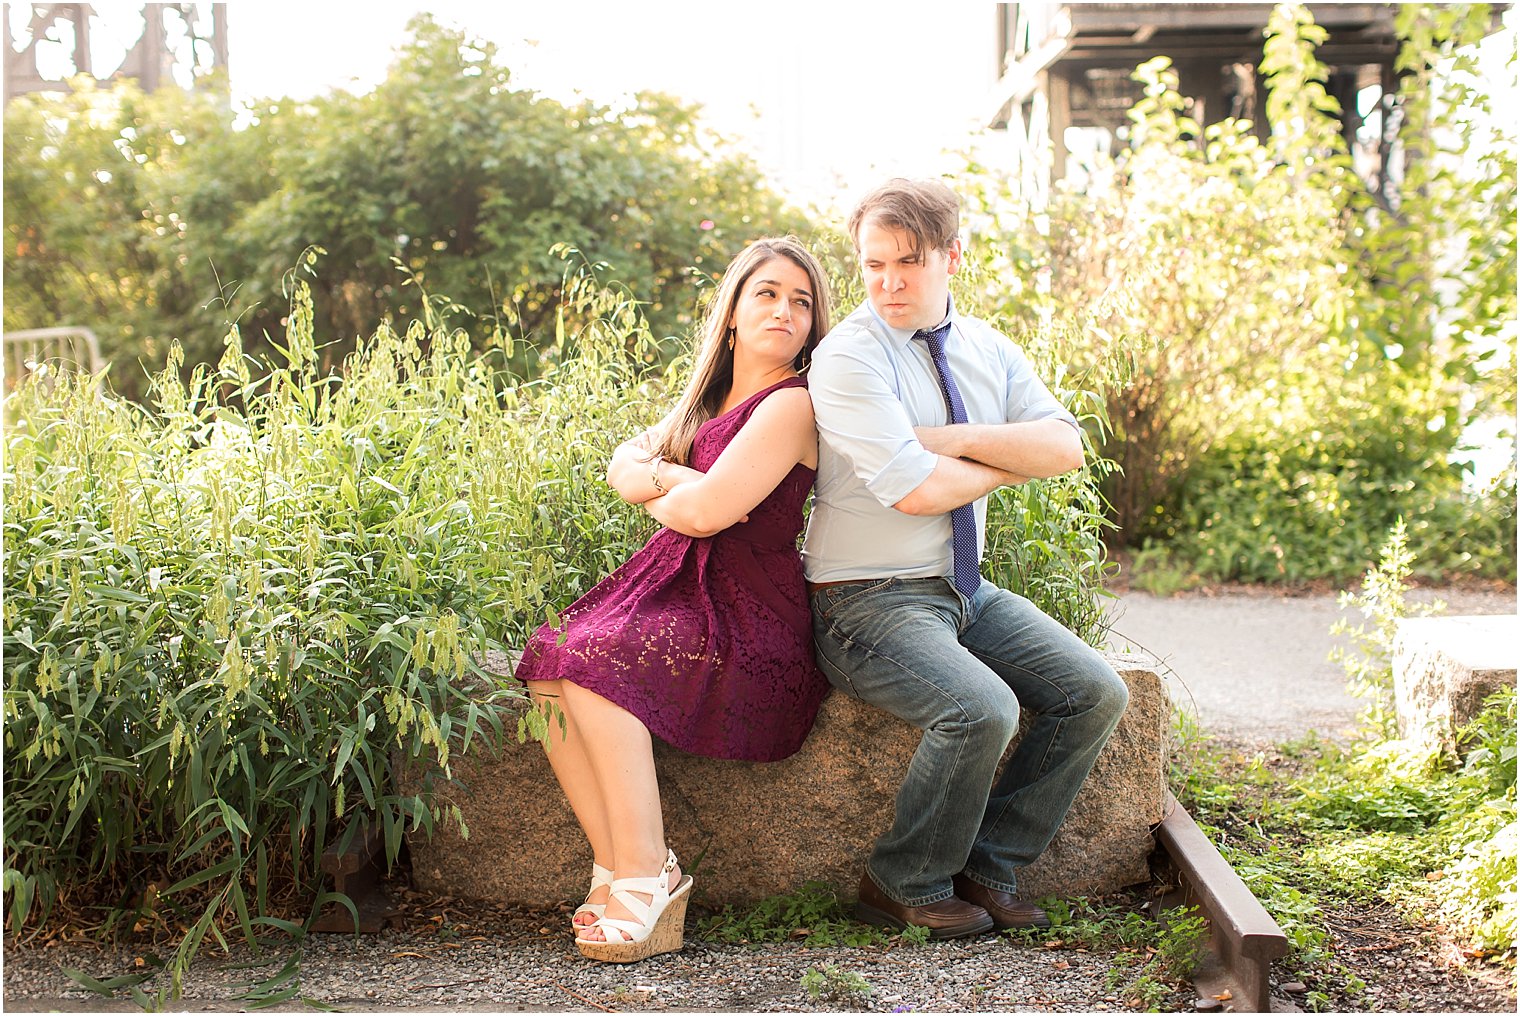 Silly pose idea for engagement photo